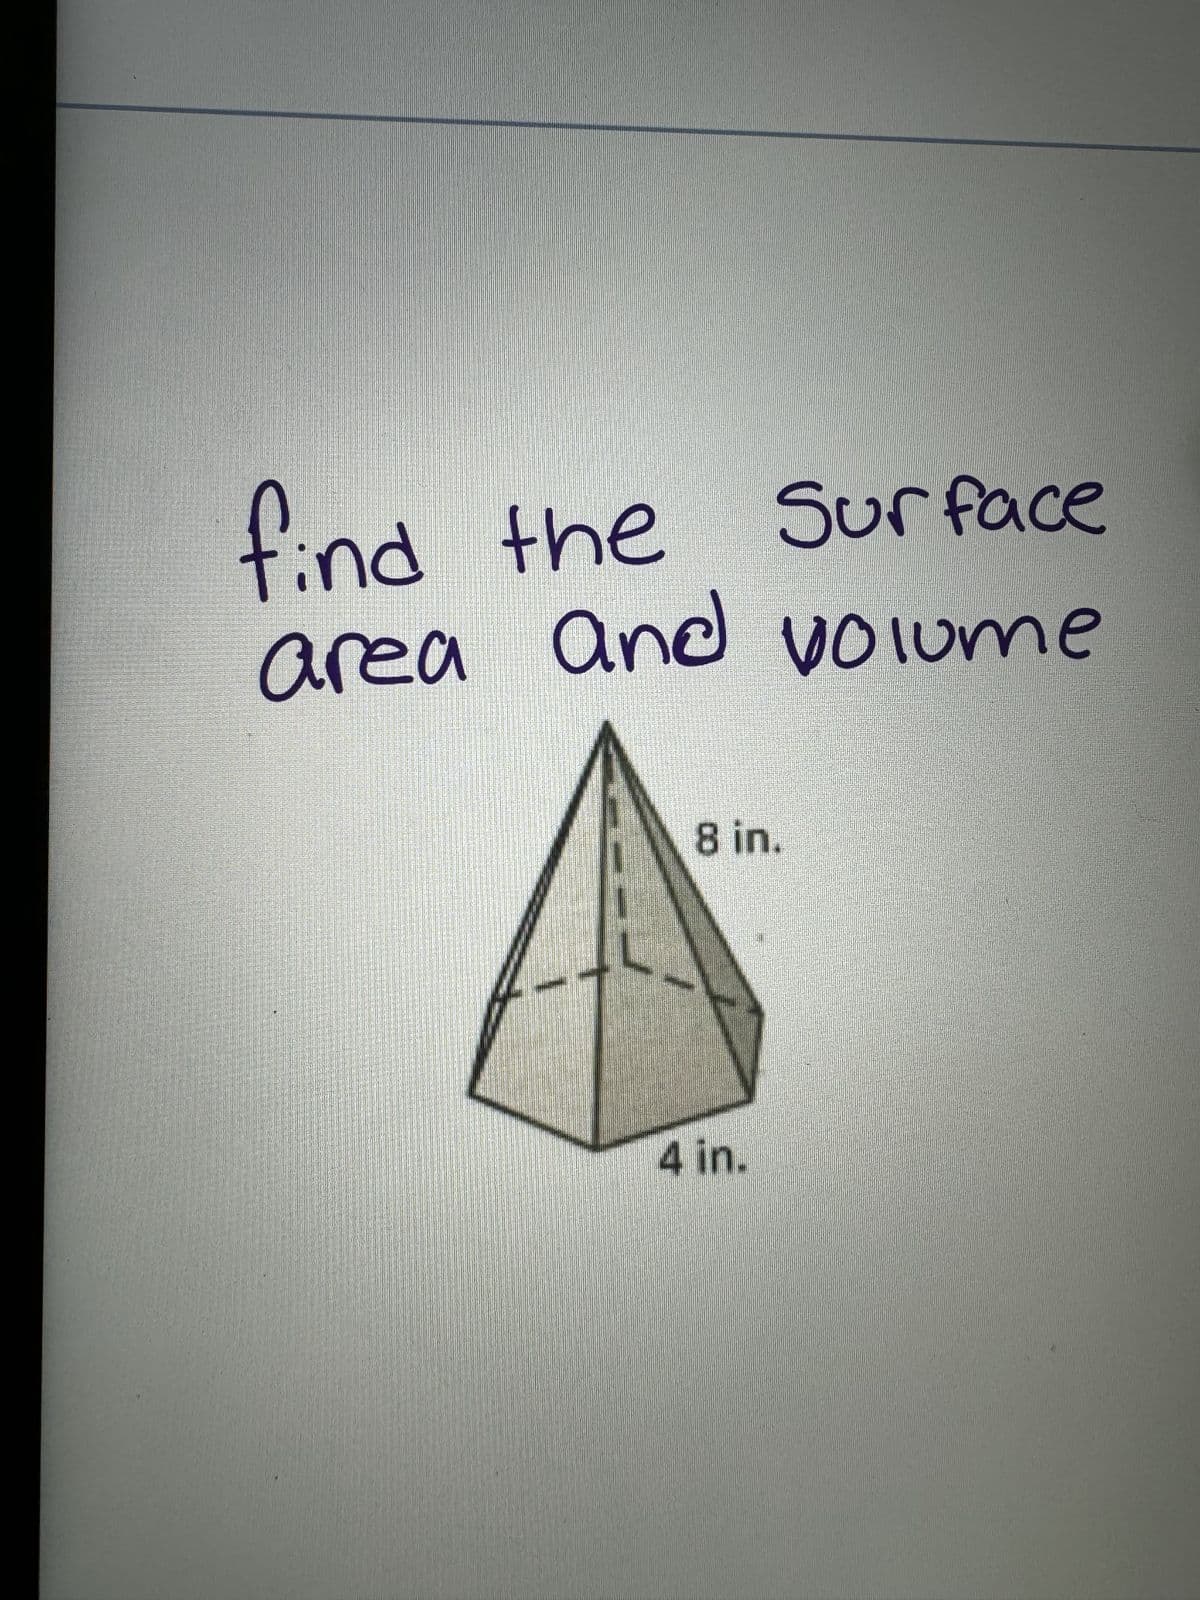 find the
Surface
area and volume
8 in.
4 in.